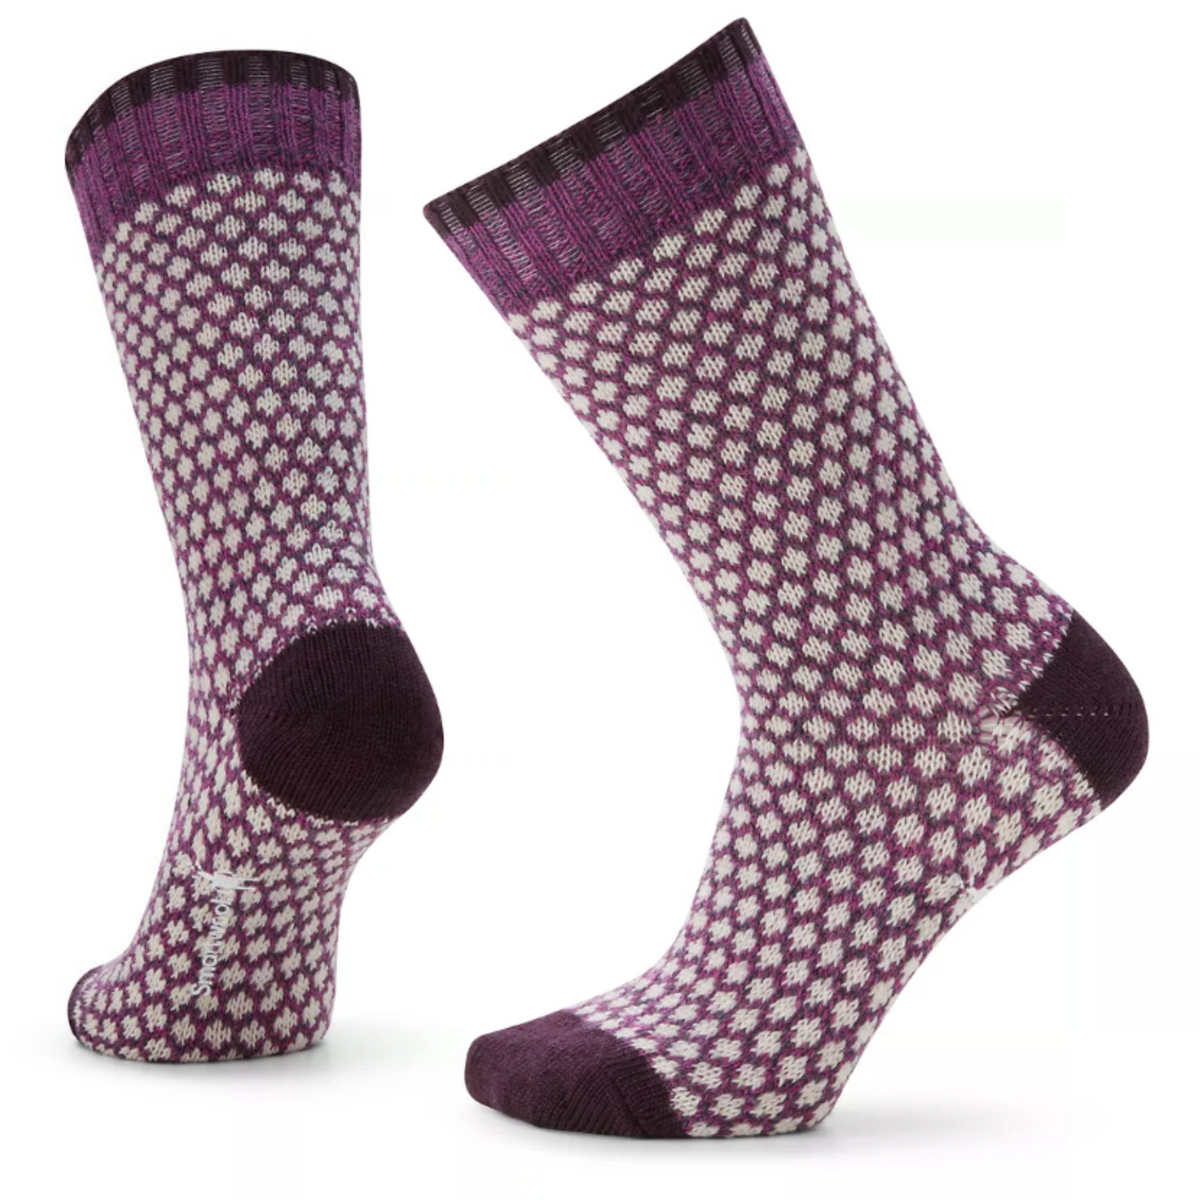 Smartwool Popcorn Polka Dot Crew women&#39;s sock featuring white and purple pattern all over with purple toes and heel. Socks shown on display feet. 